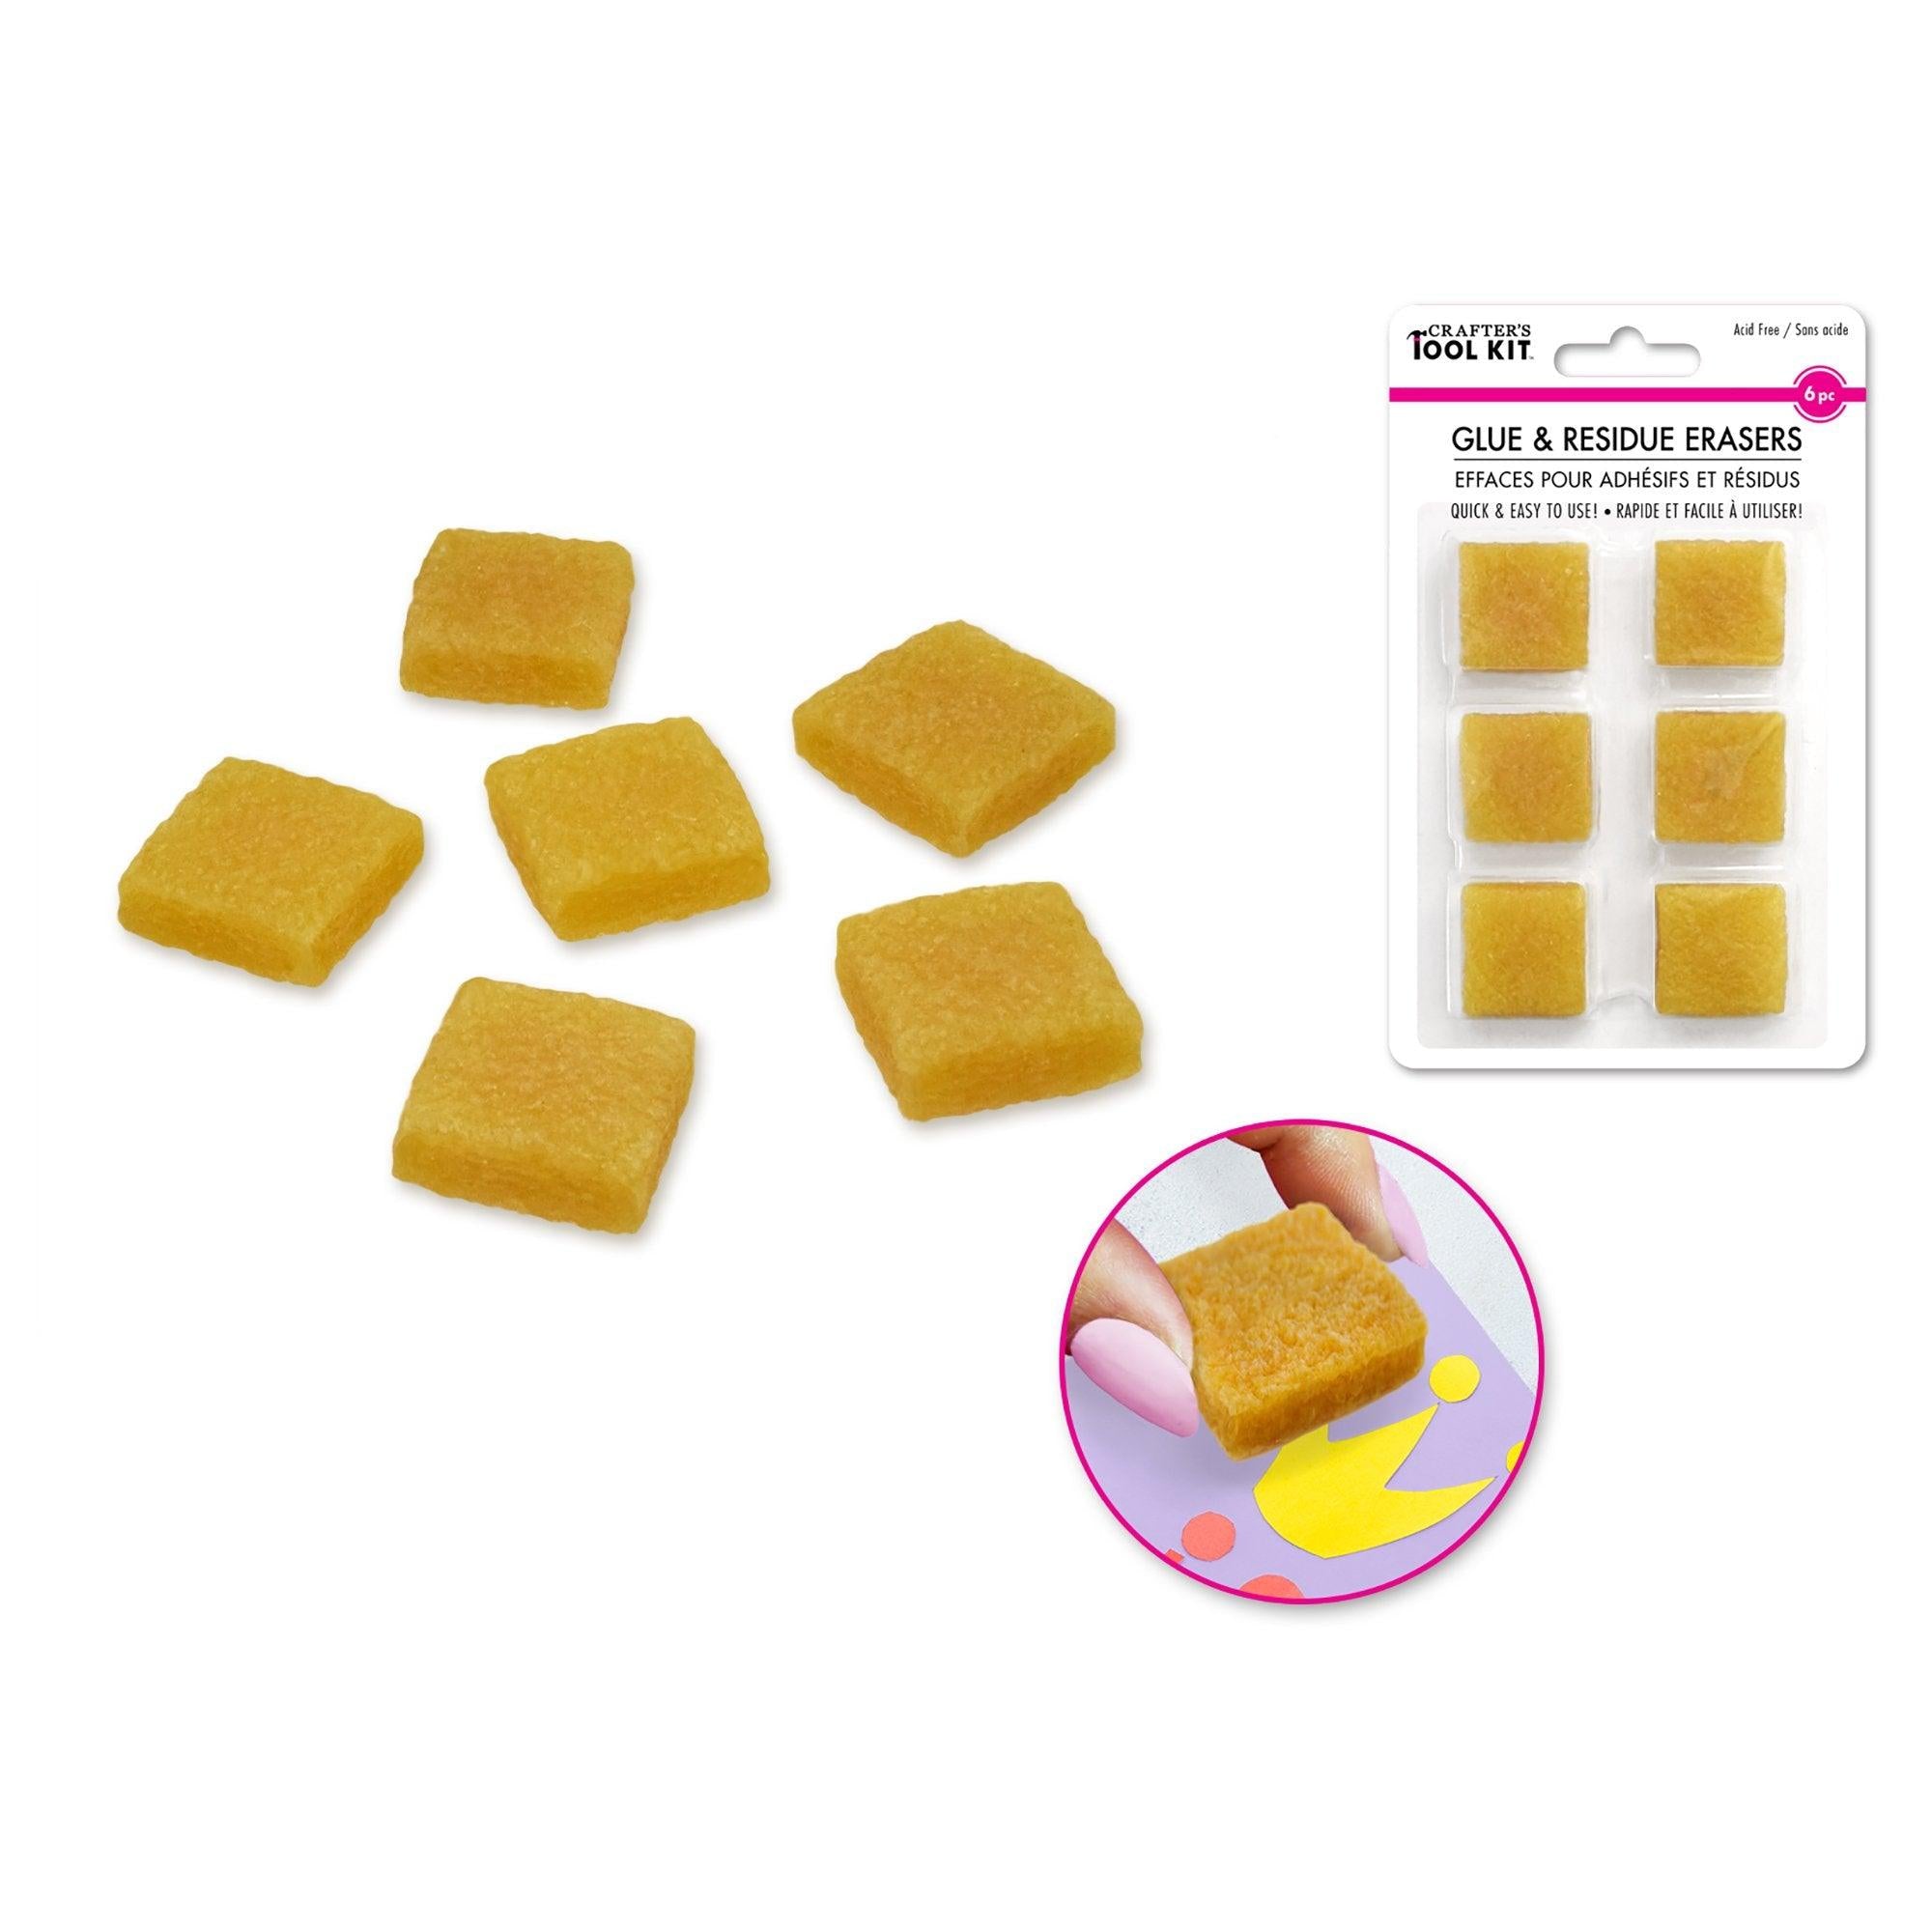 Crafter Toolkit Glue & Residue Erasers 6pc 1in X1in - Dollar Max Depot